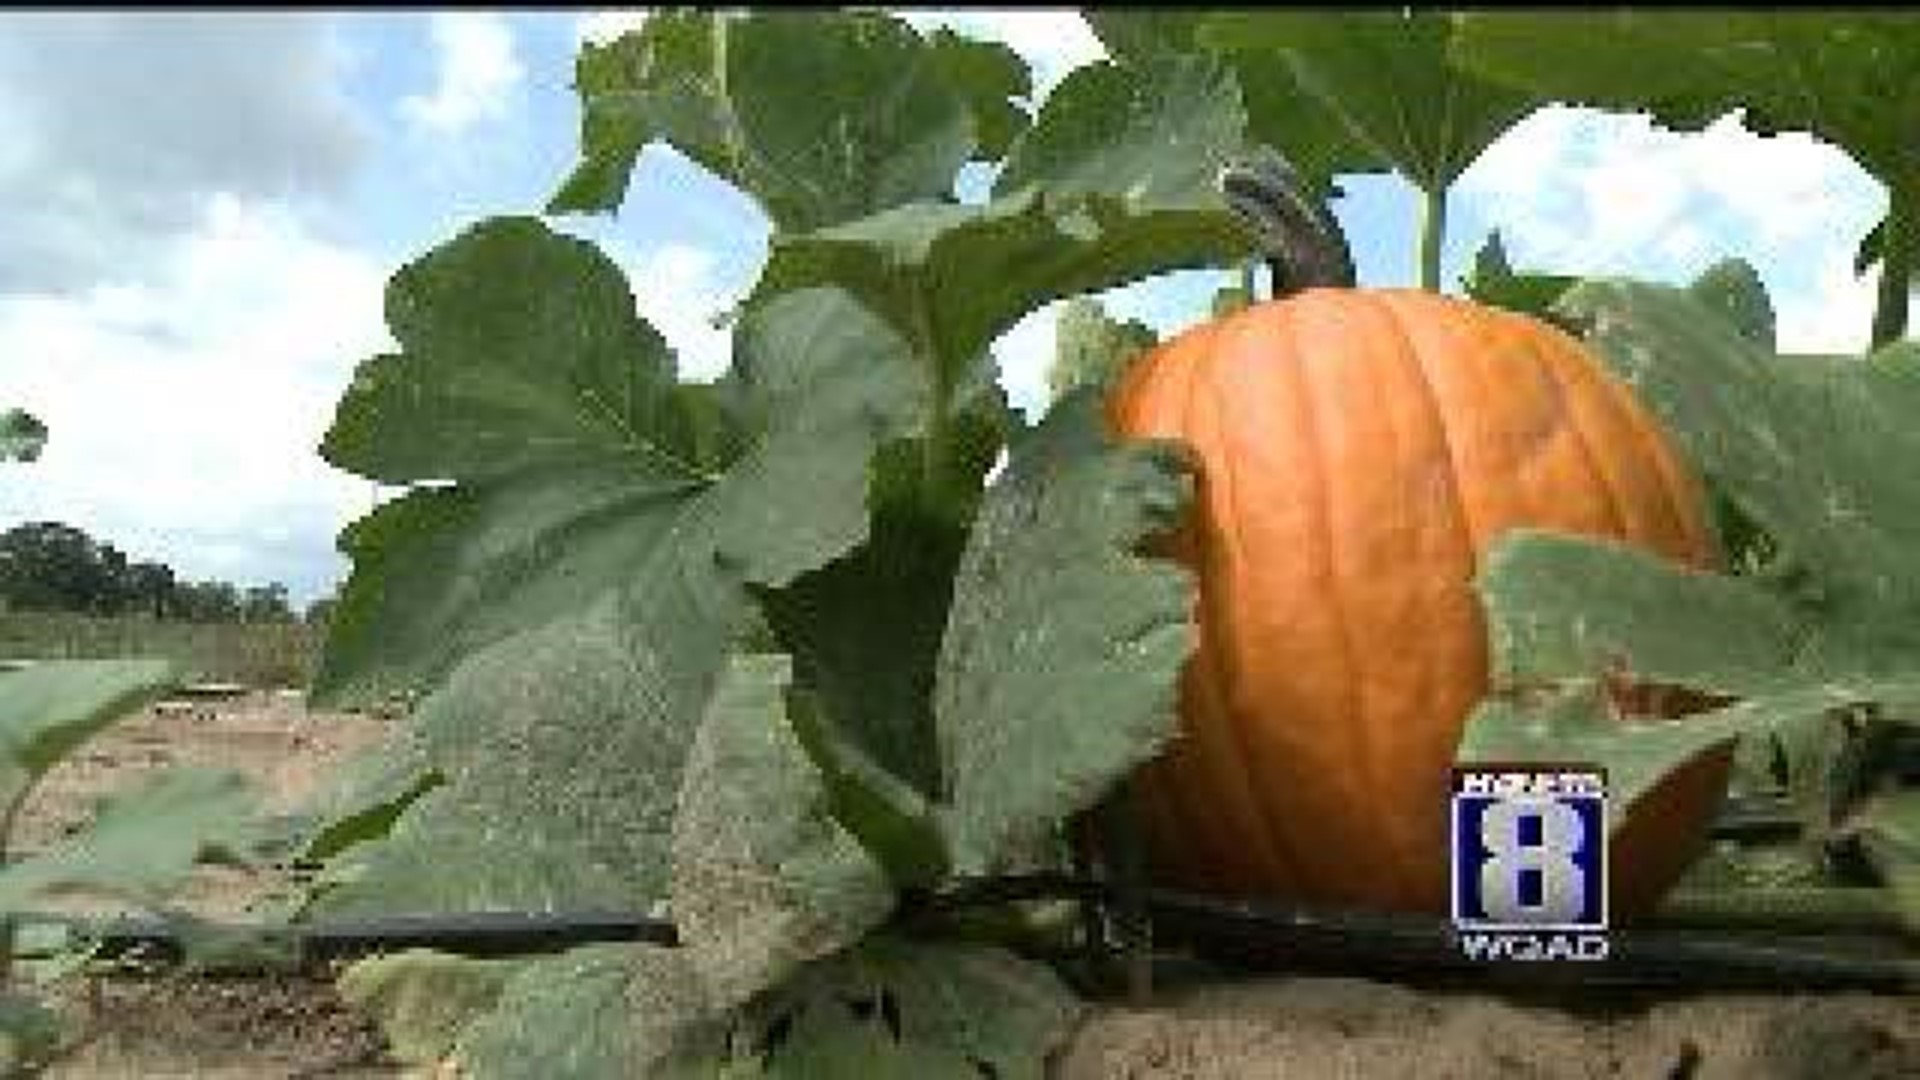 Fall crops may come early